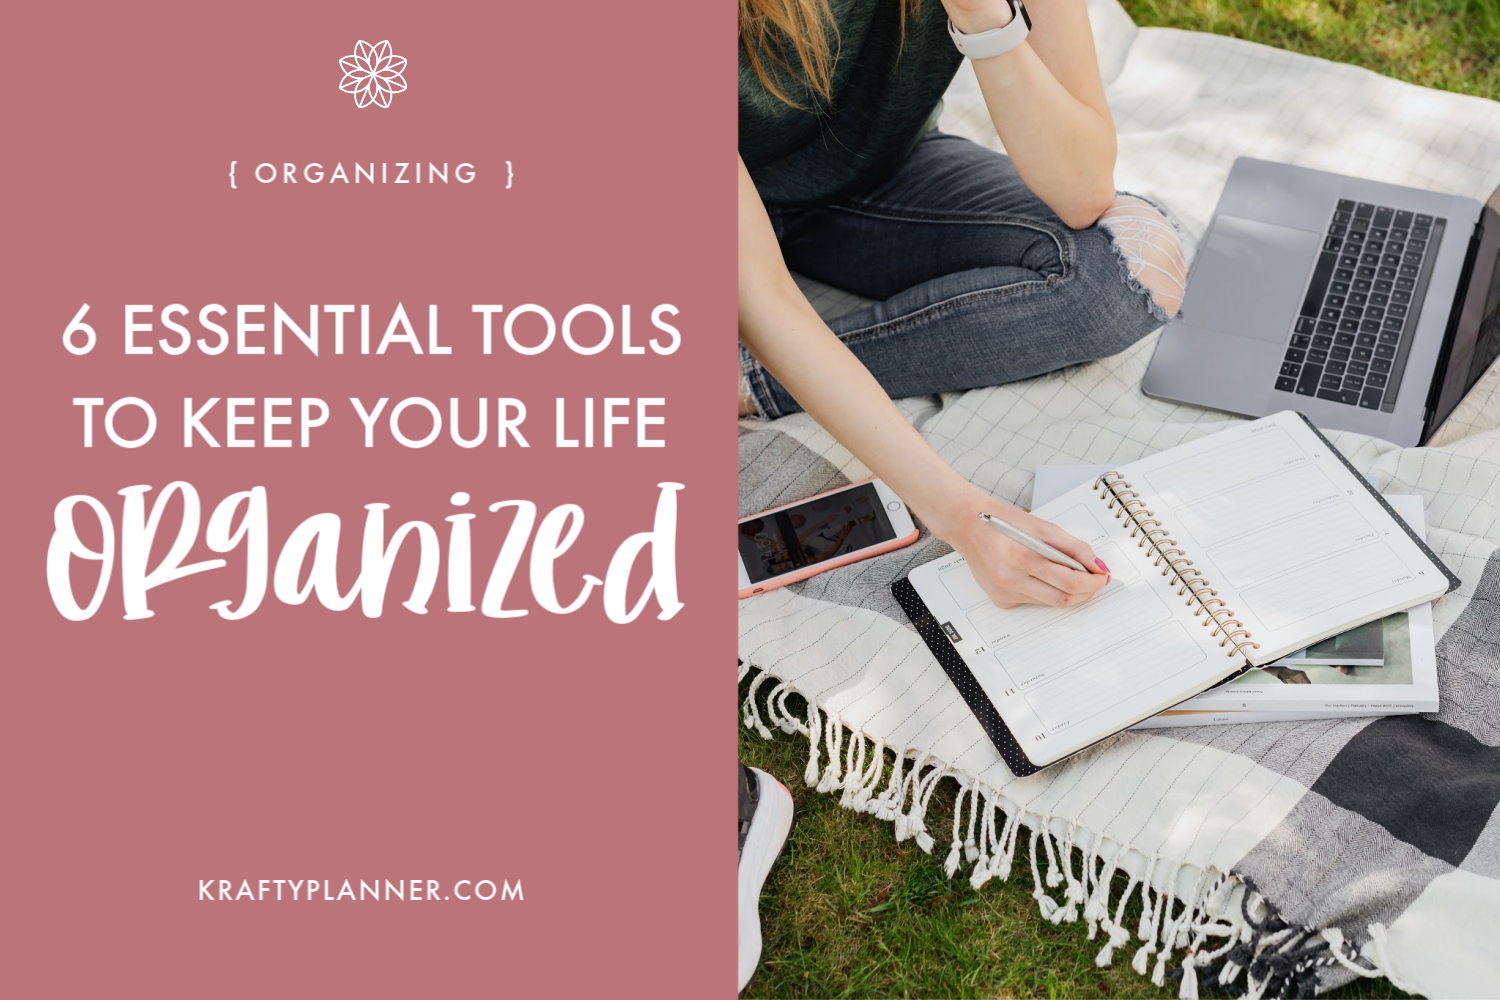 6 Essential Tools to Keep Your Life Organized